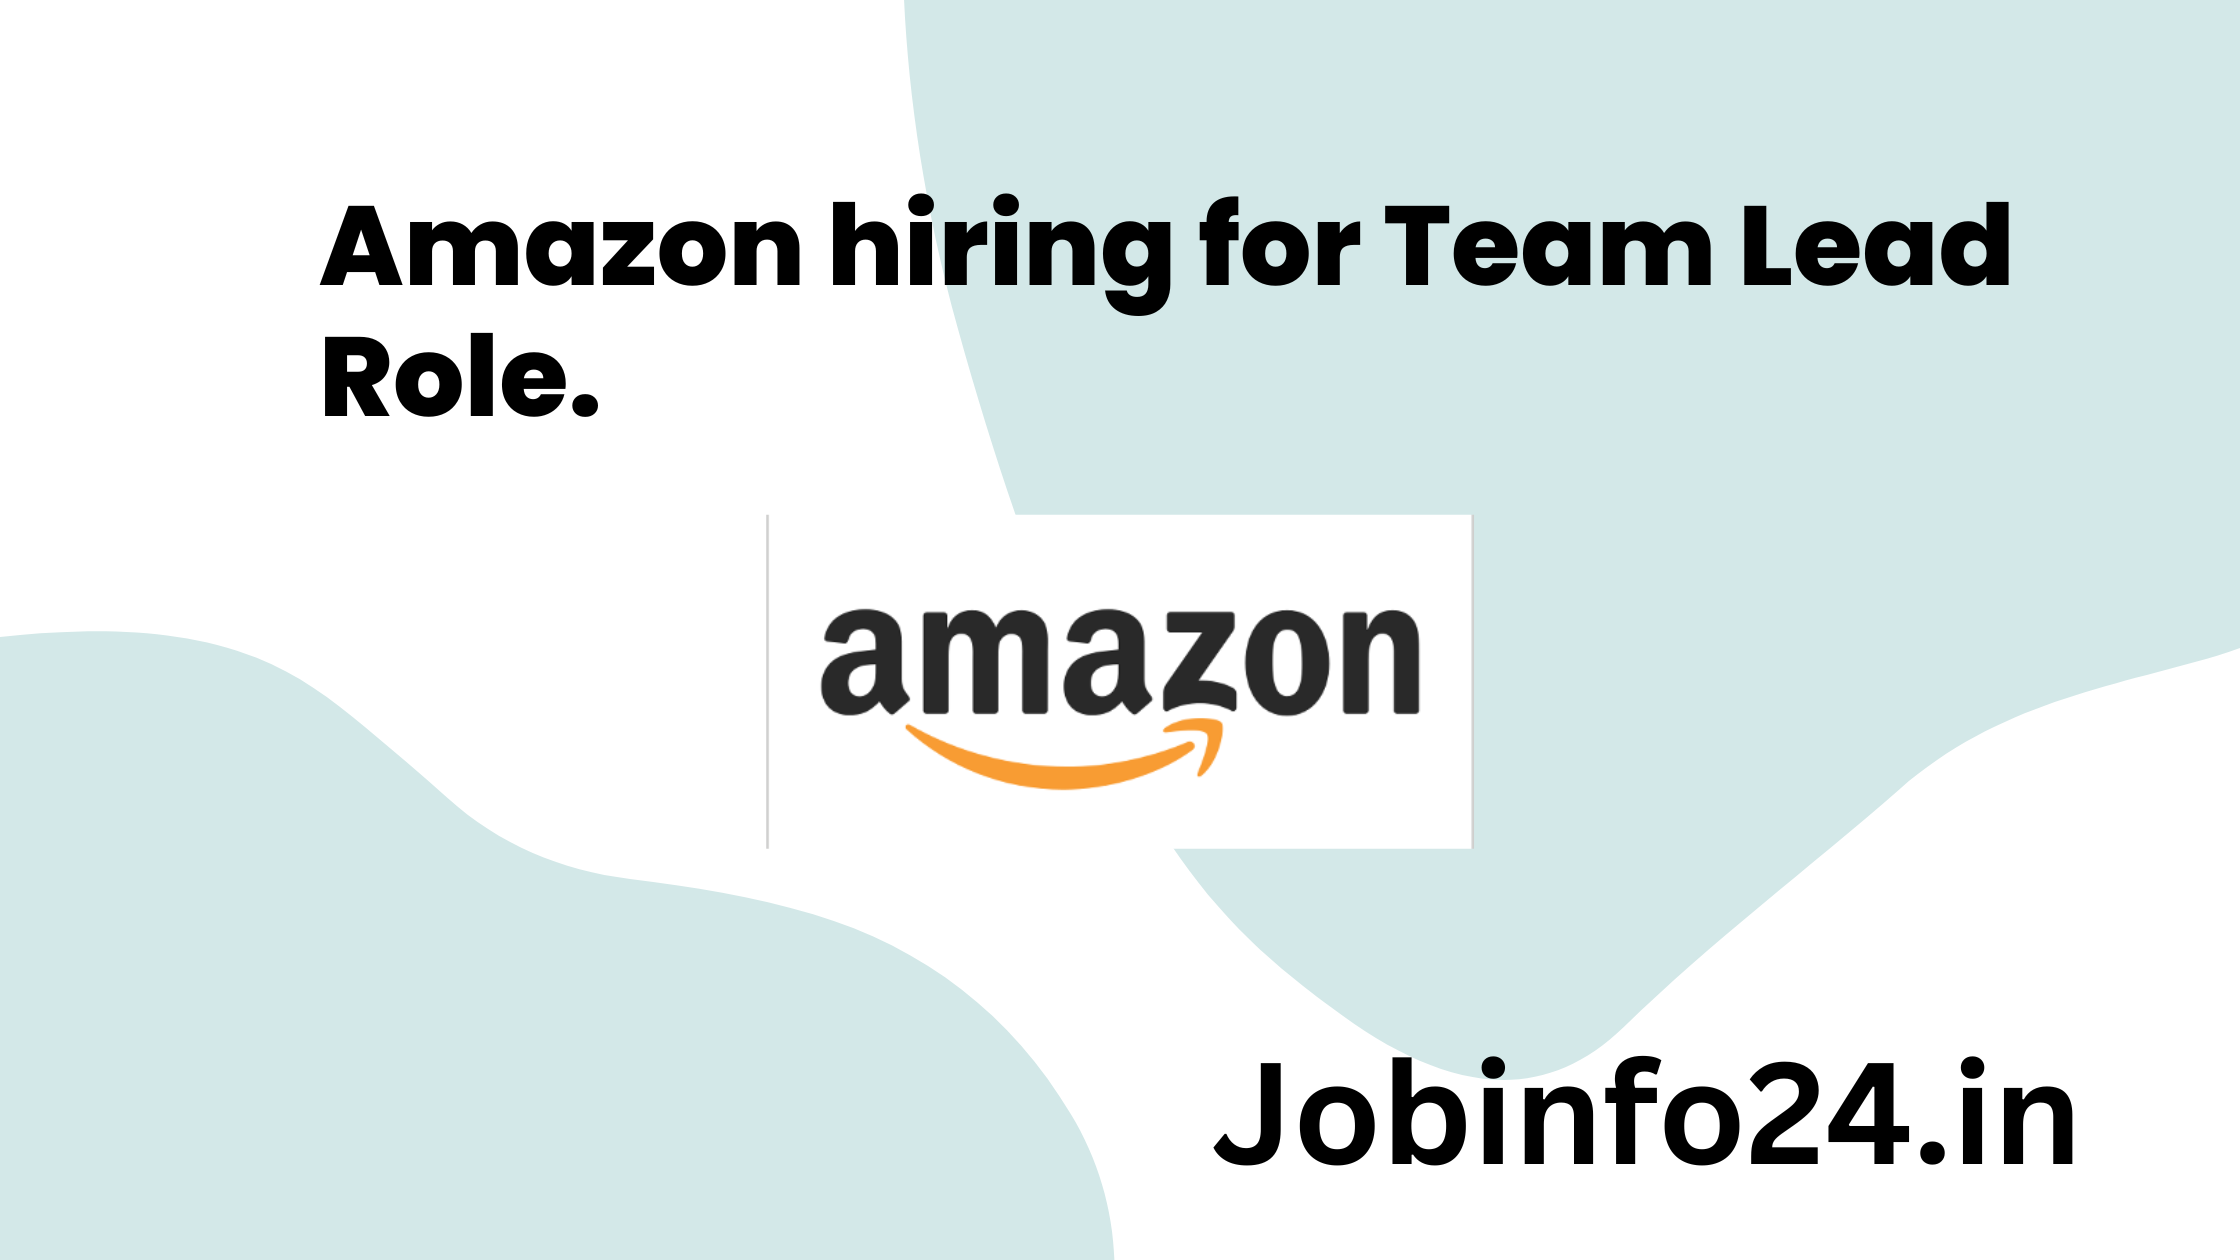 Amazon hiring for Team Lead Role.